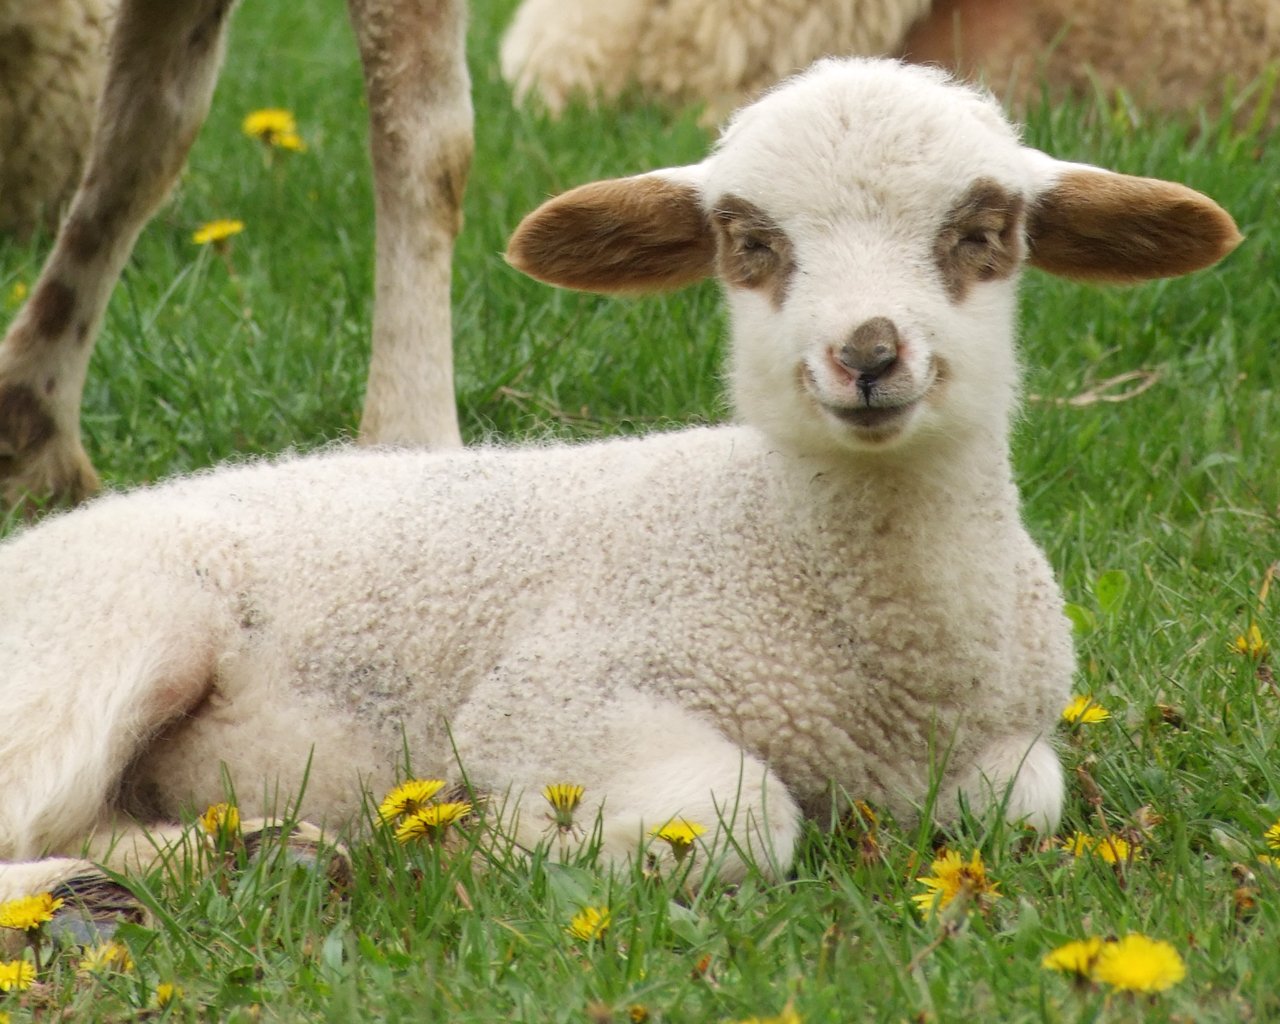 a sheep lays in the grass and looks straight at camera